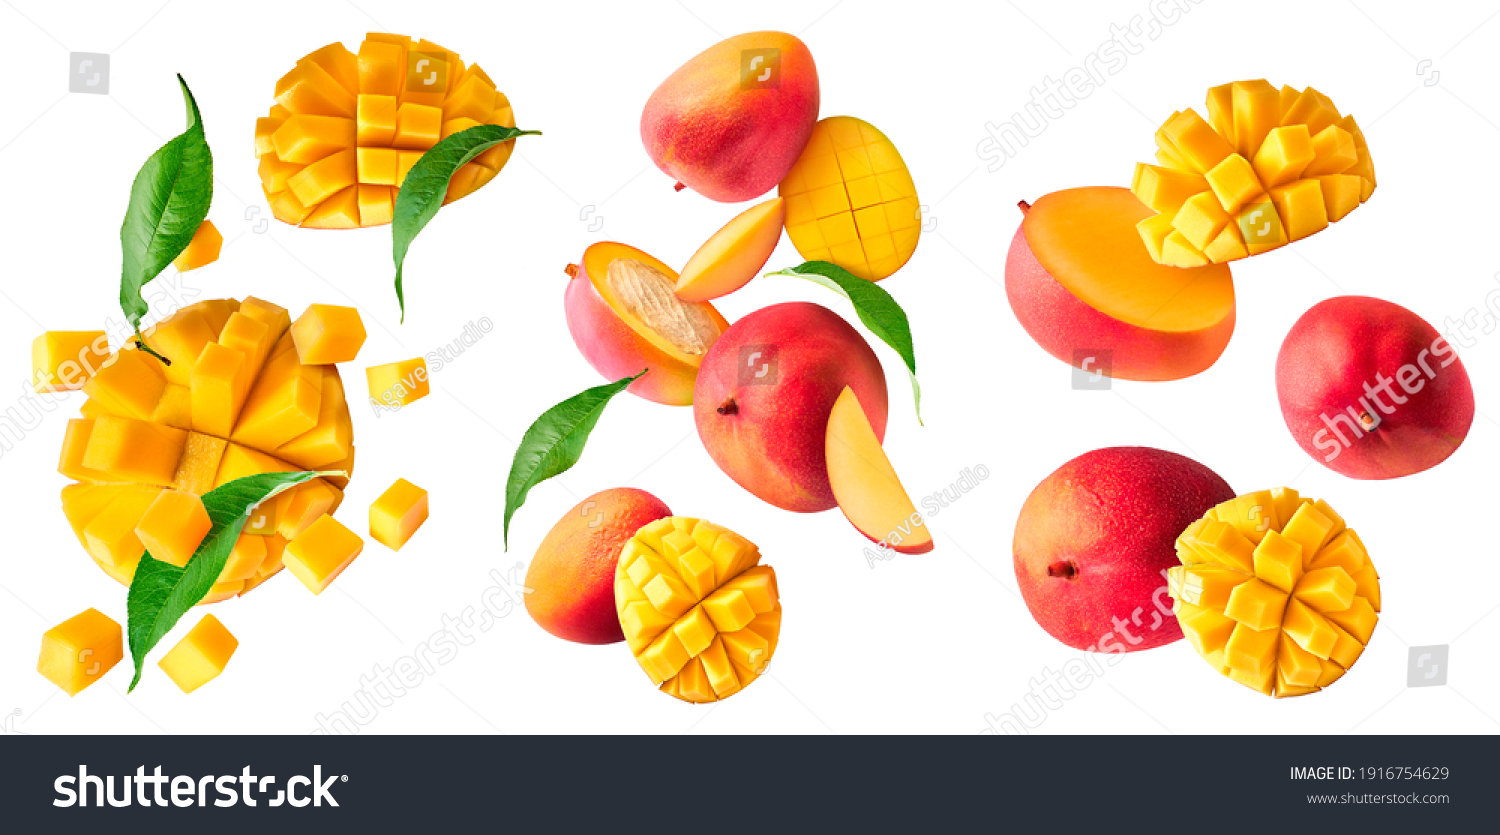 A set with Fresh ripe mango with leaves falling in the air isolated on white background. Food levitation concept. High resolution image #1916754629